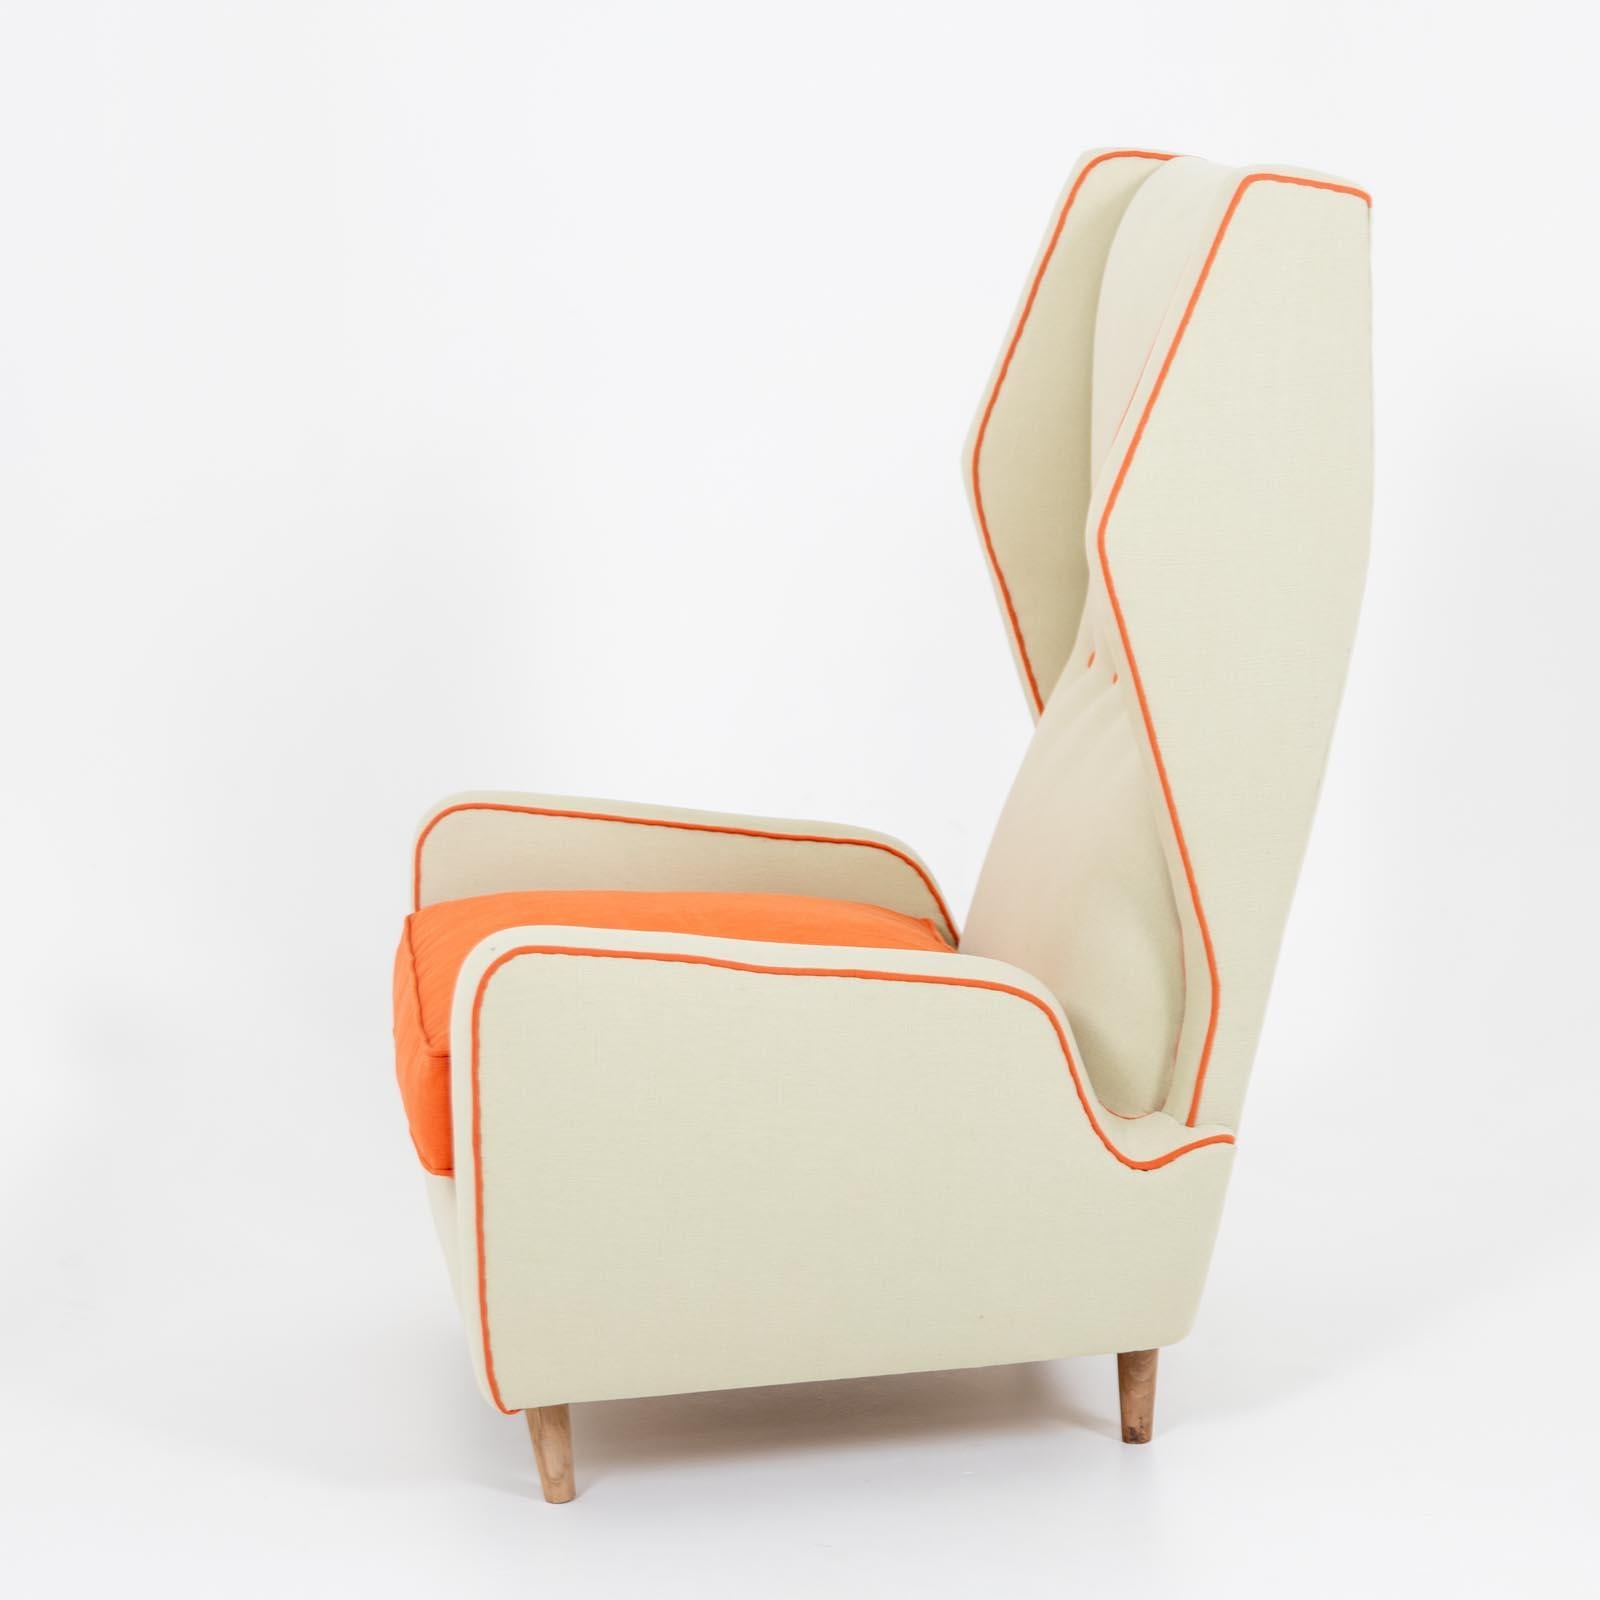 Italian mid-century lounge chair with high backrest and armrests. The armchair has light-colored upholstery and is accentuated by orange piping with cushions and buttons.